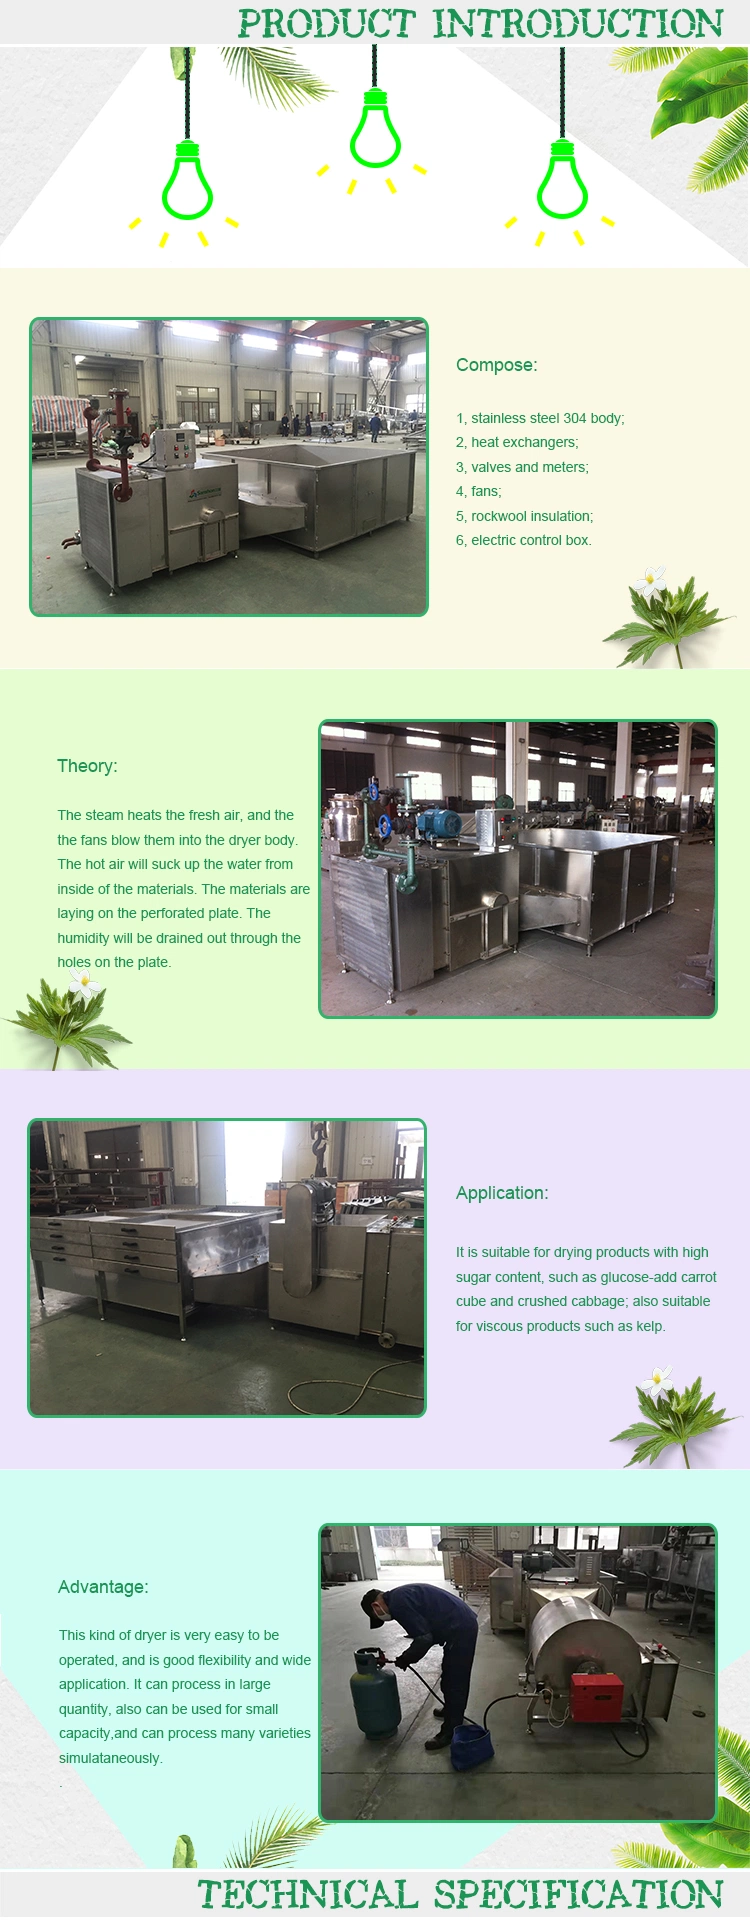 Walley Stainless Steel Tank Type of Hot Air Dryer for Drying Kelp